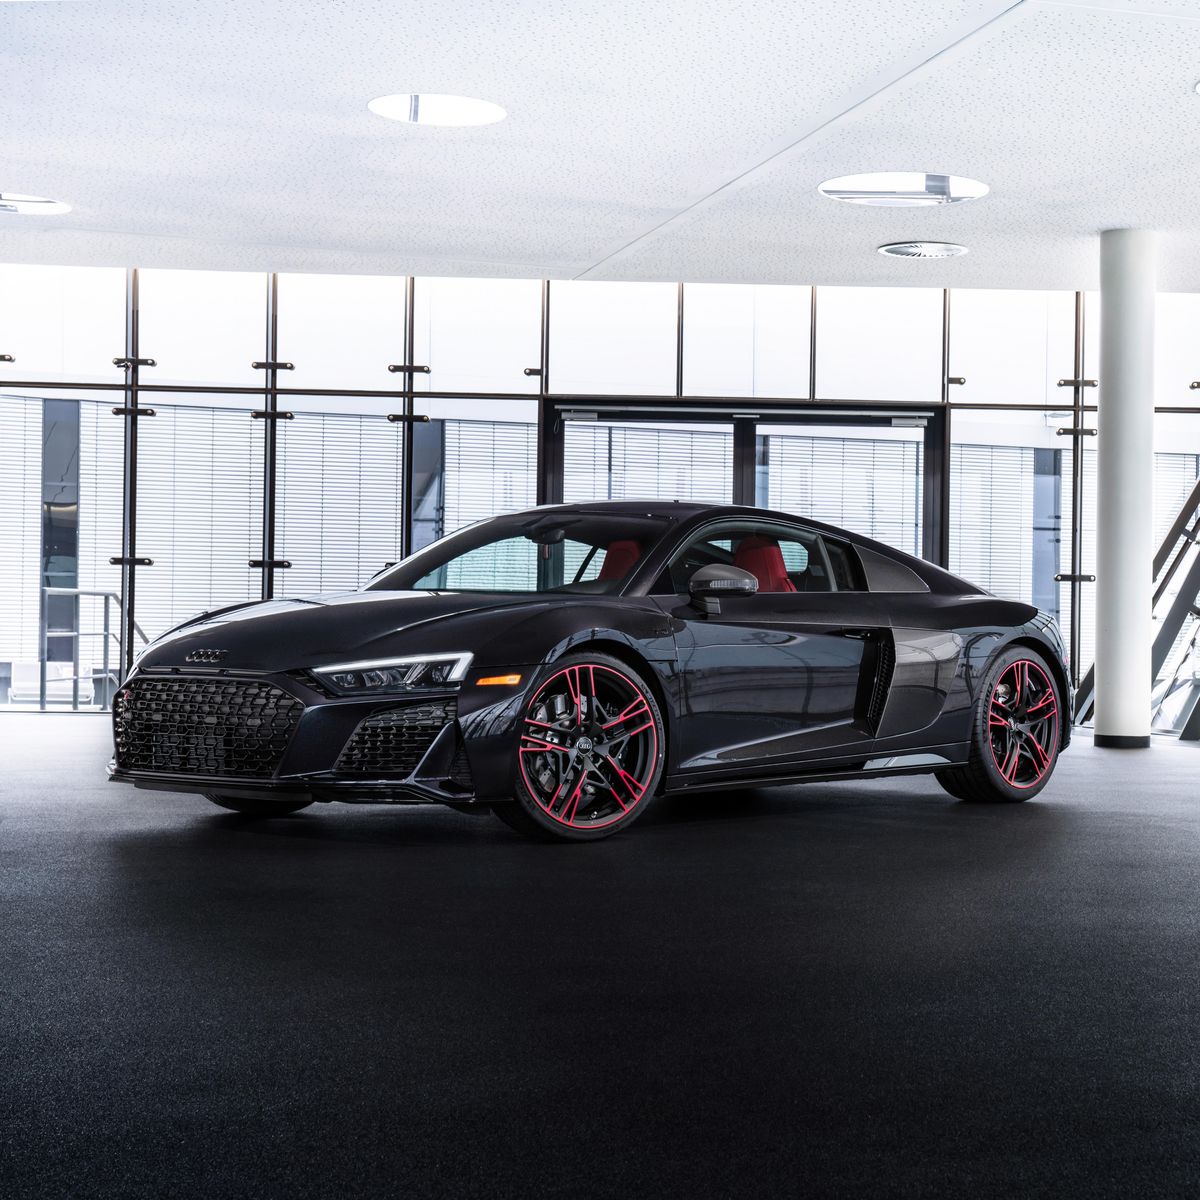 Audi R8 Panther Edition Has Wheels, Limited to 30 Cars